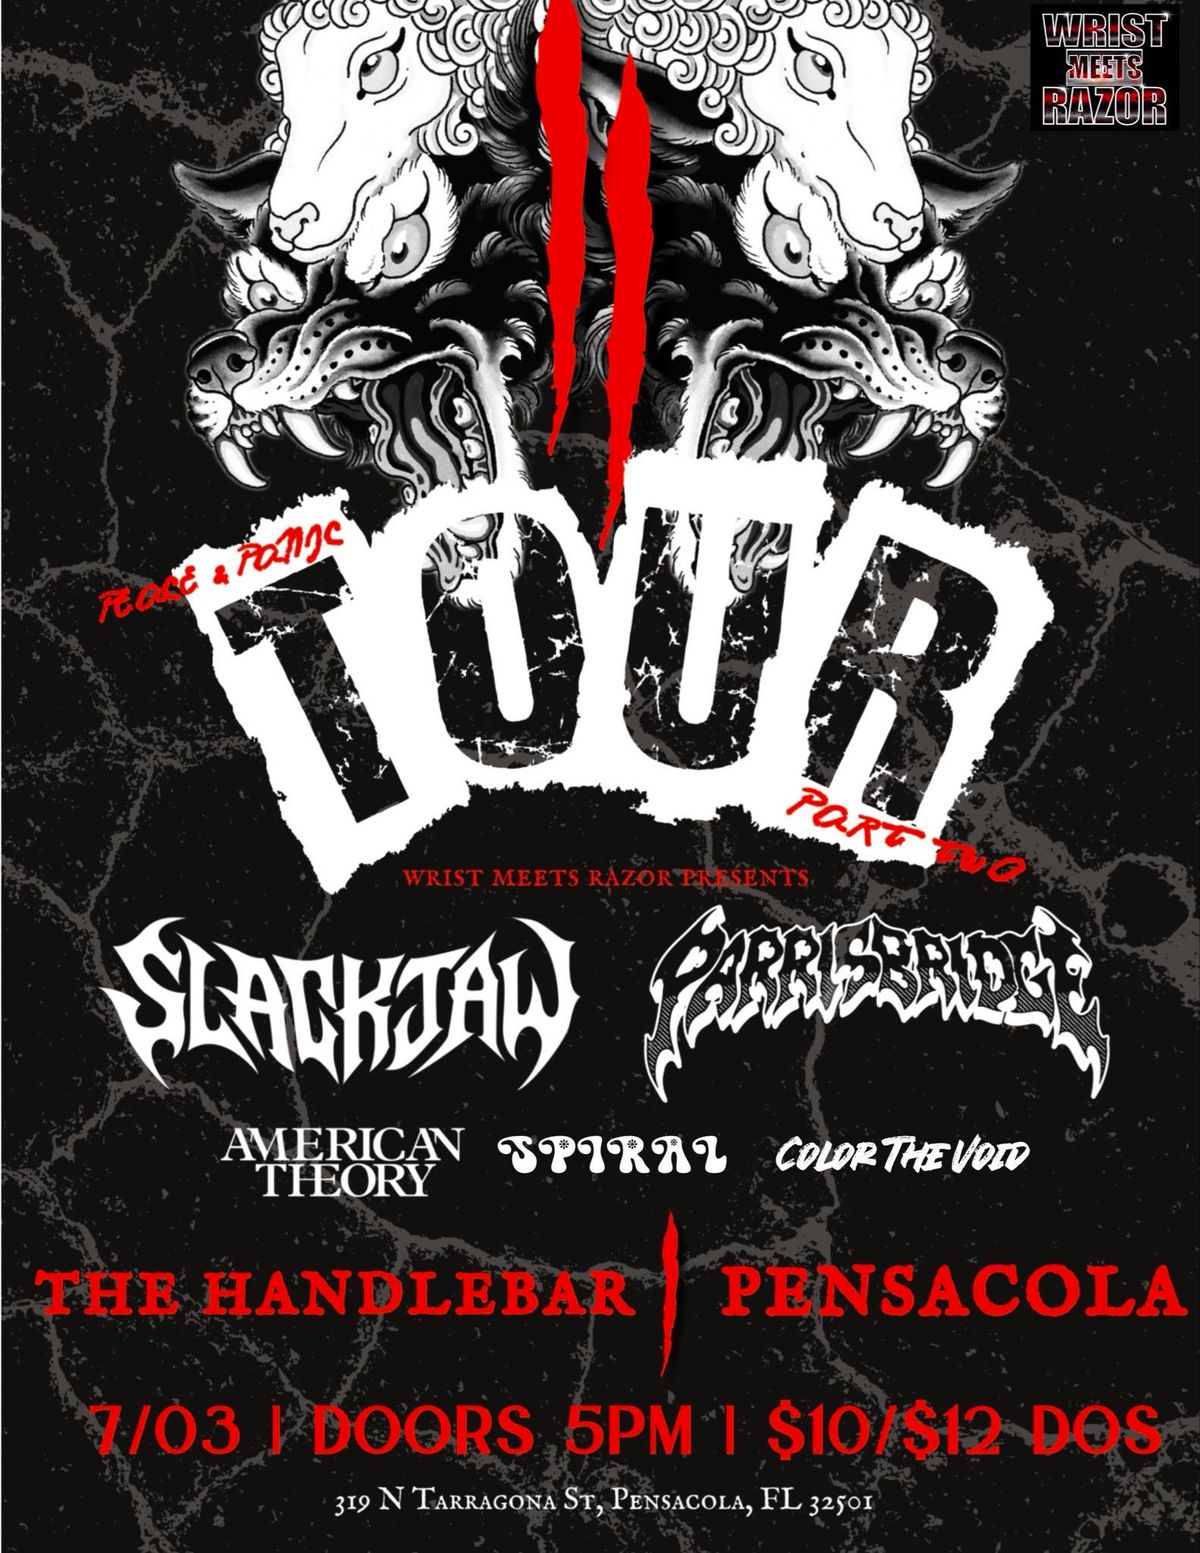 SlackJaw, Parris Bridge, American Theory, Spiral, and Color The Void at The Handlebar